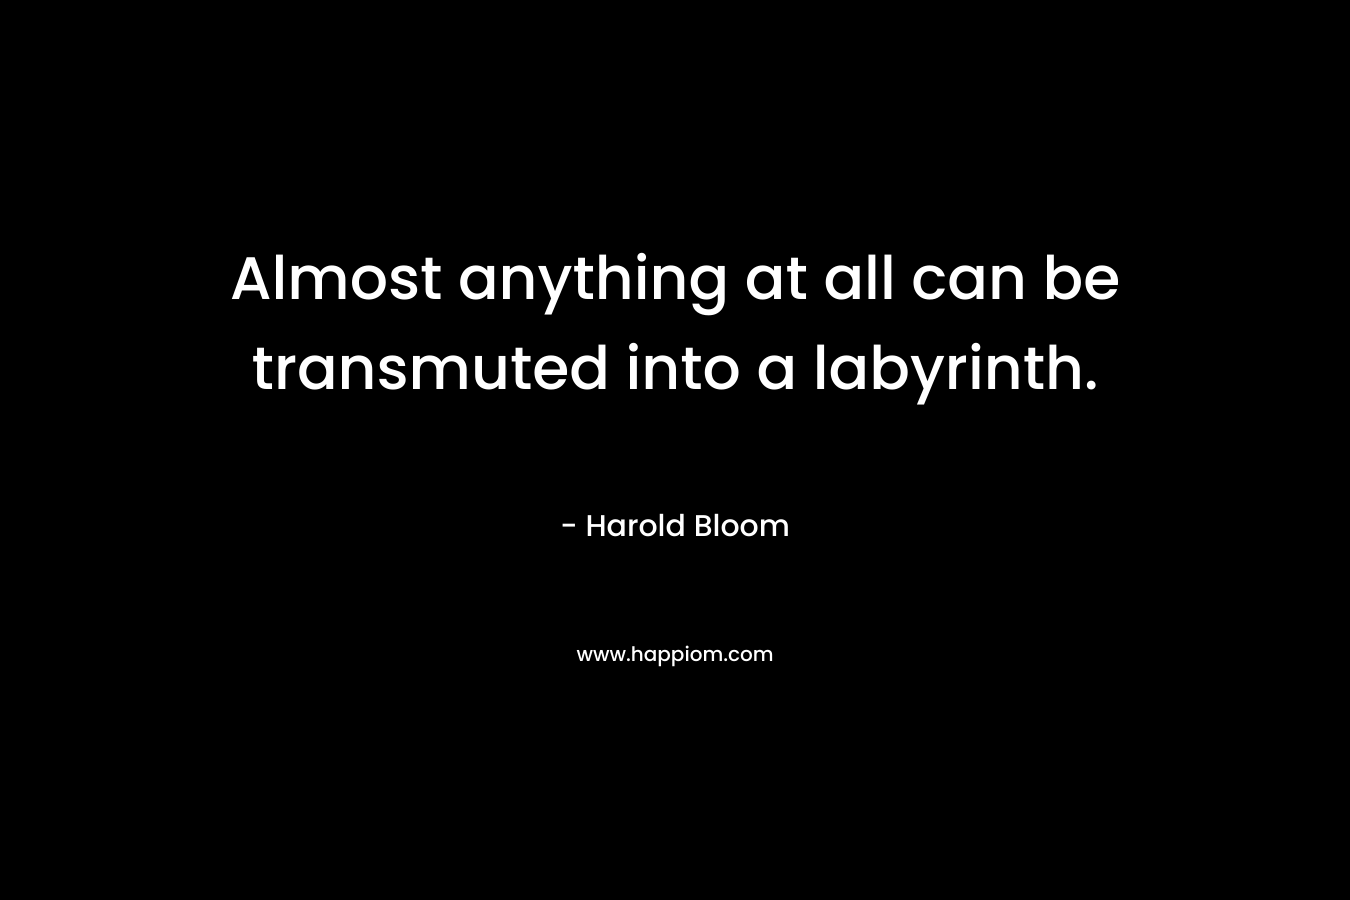 Almost anything at all can be transmuted into a labyrinth.